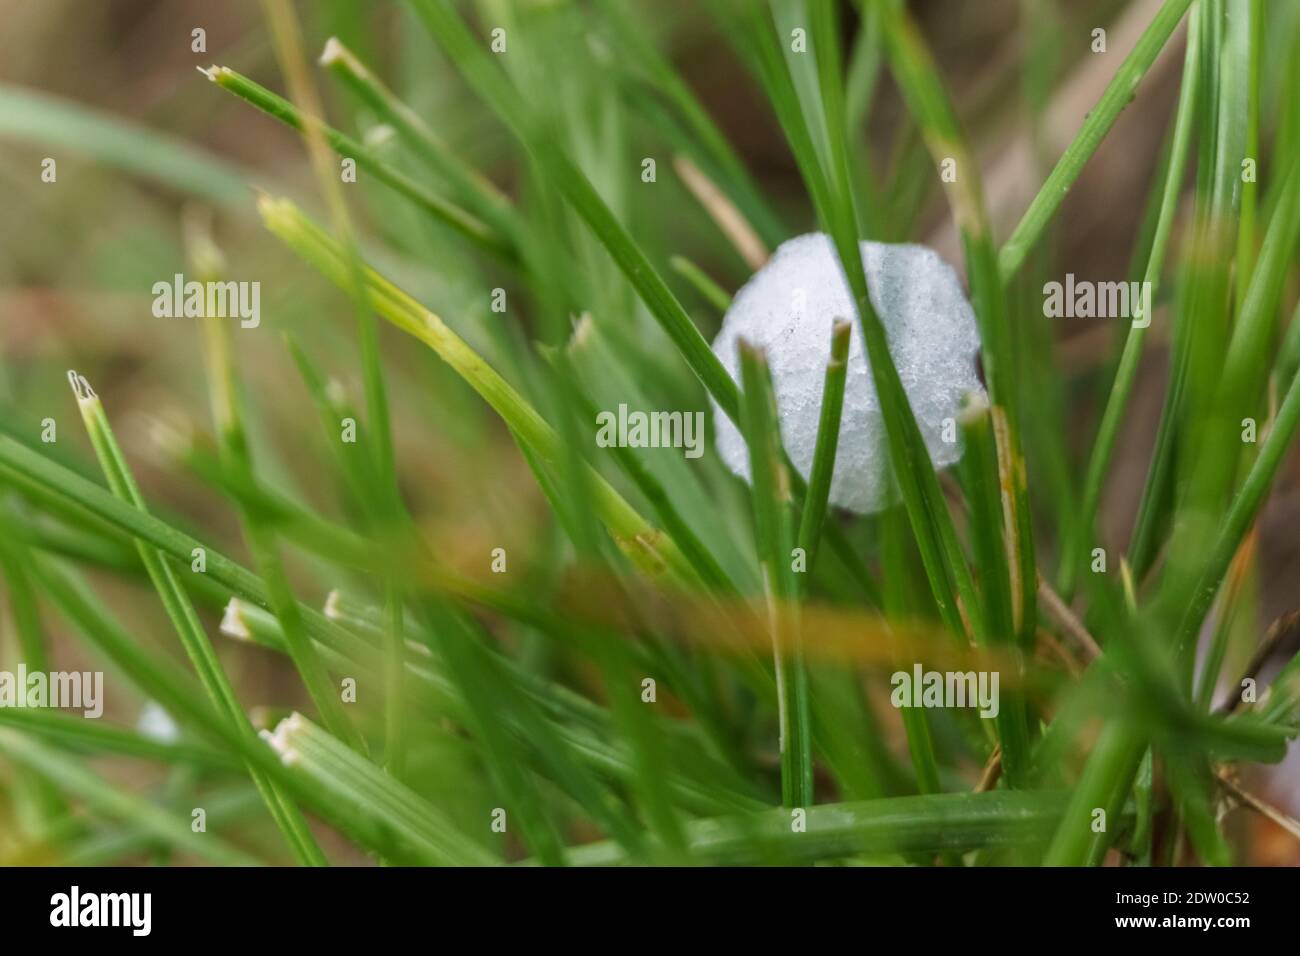 detail of single hailstone with grass in springtime Stock Photo